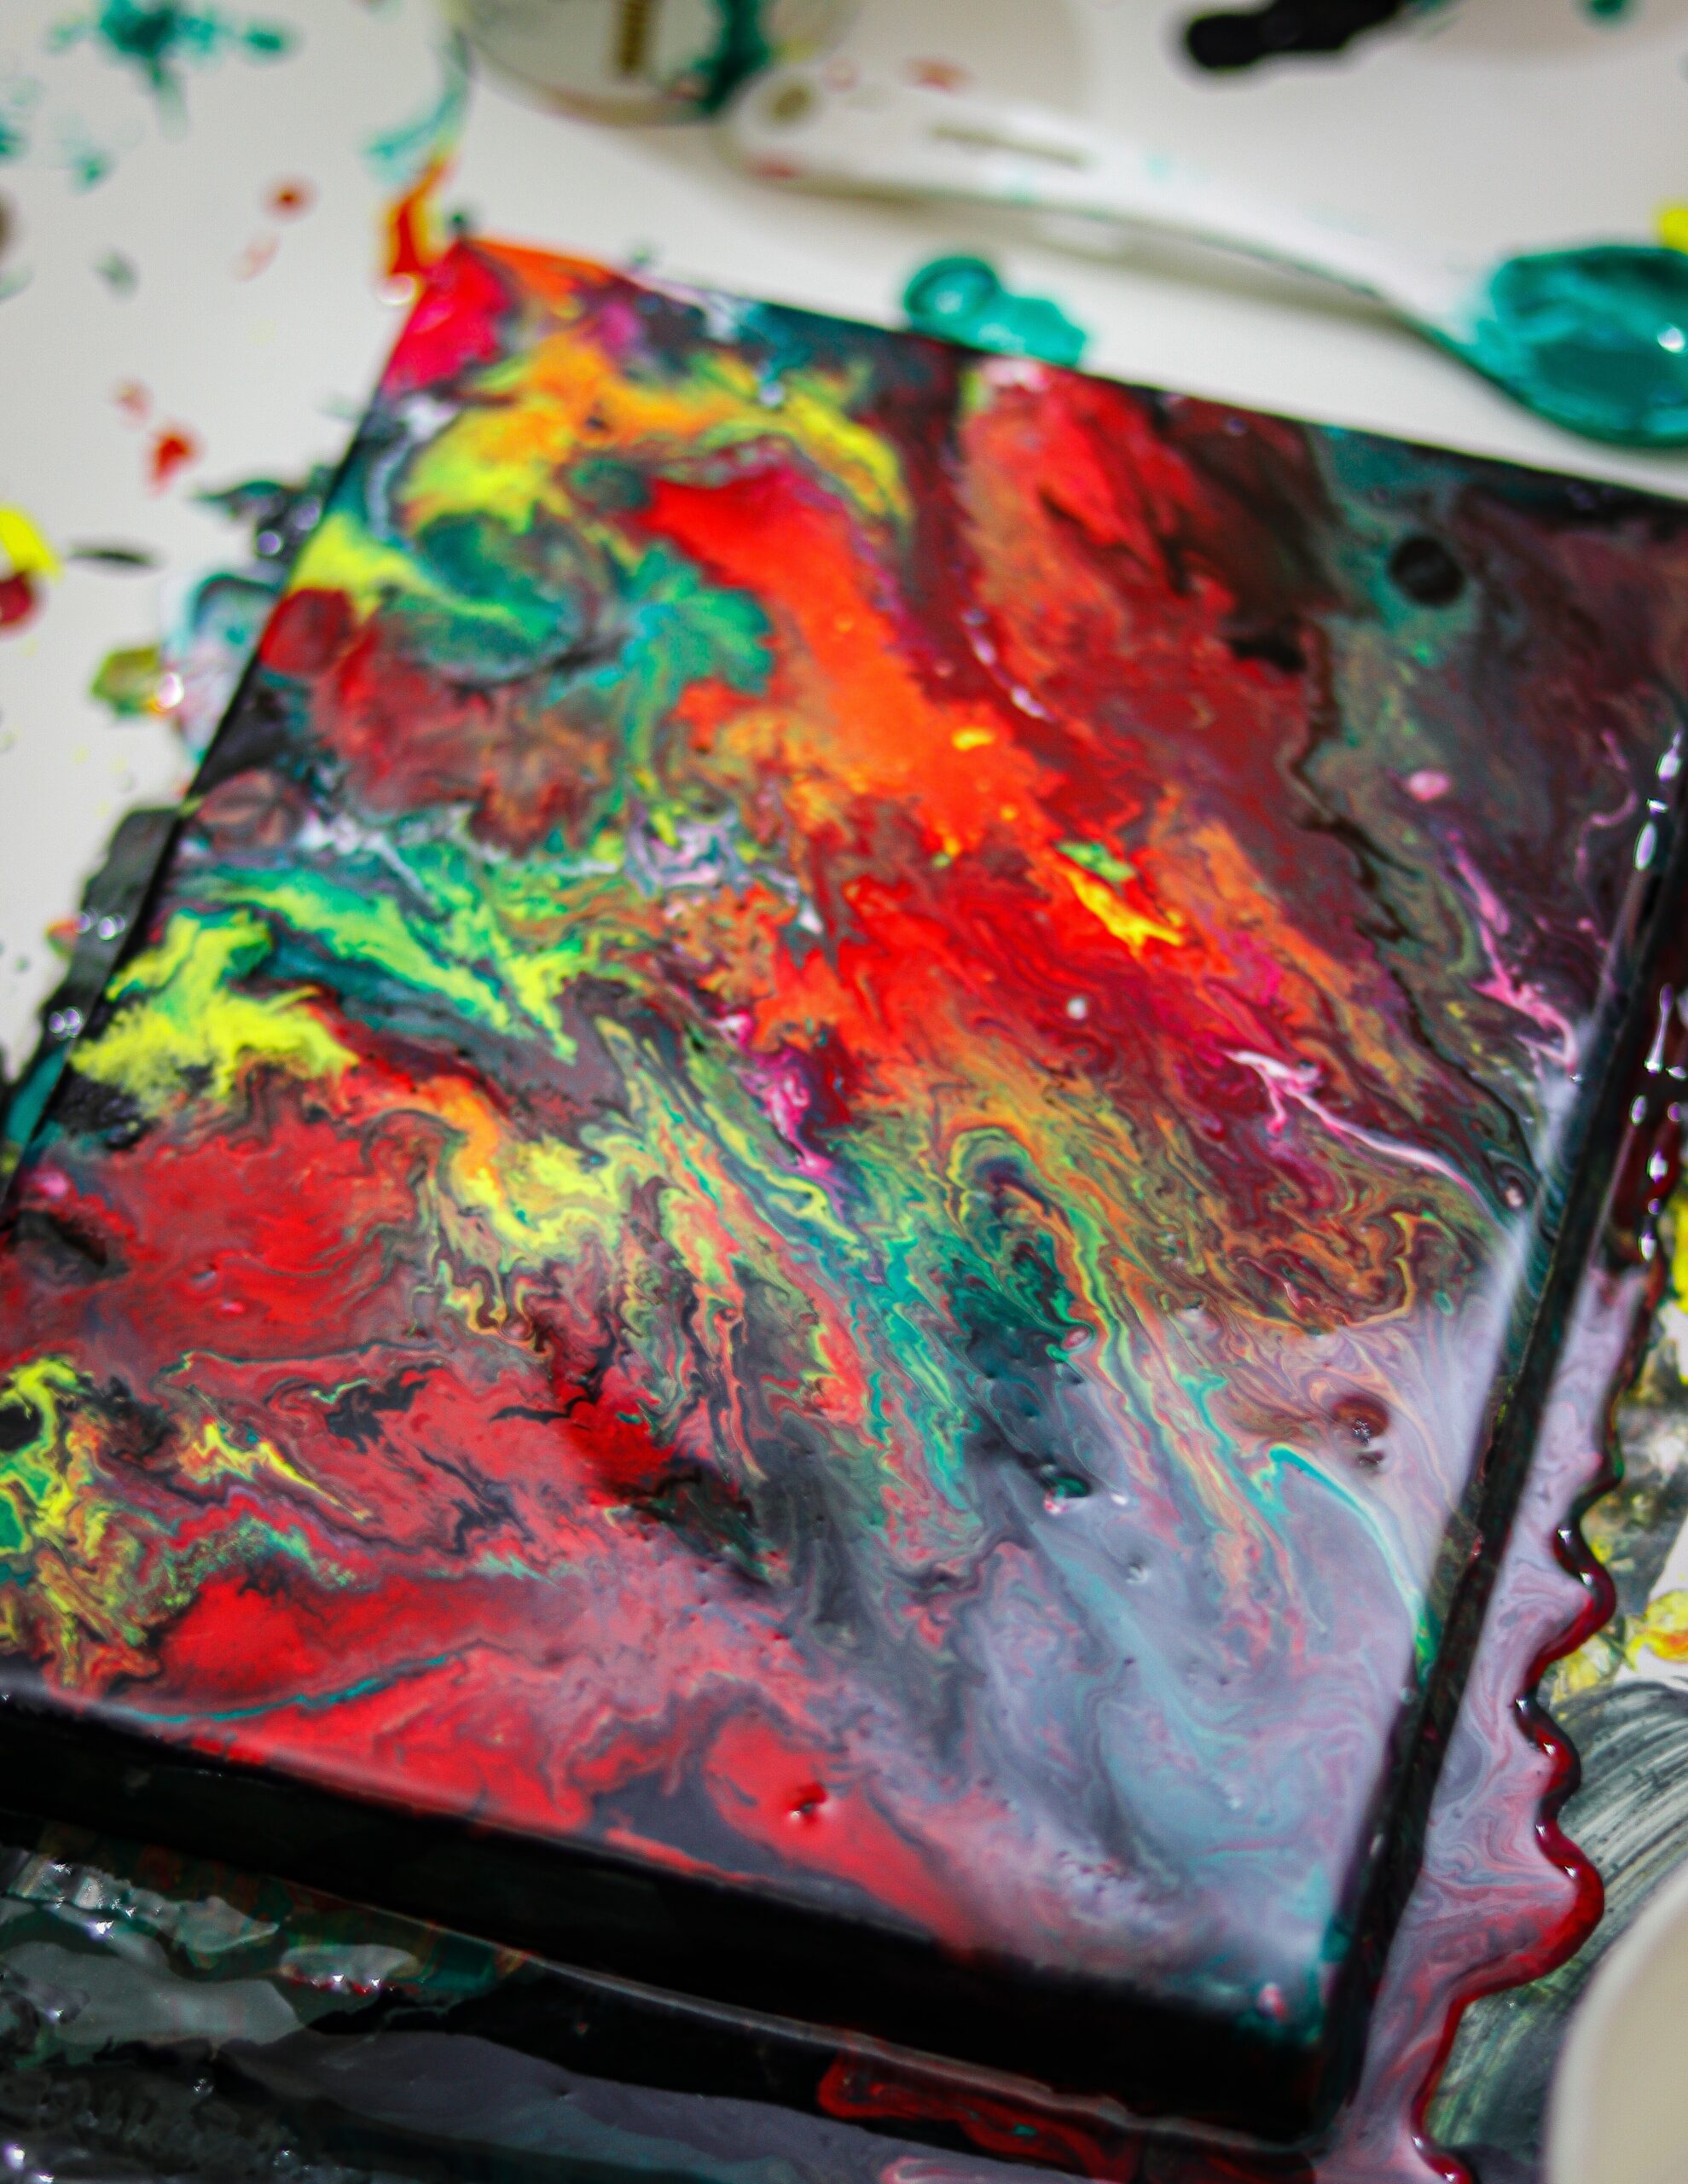 7 things I have learnt in one month of acrylic paint pouring.